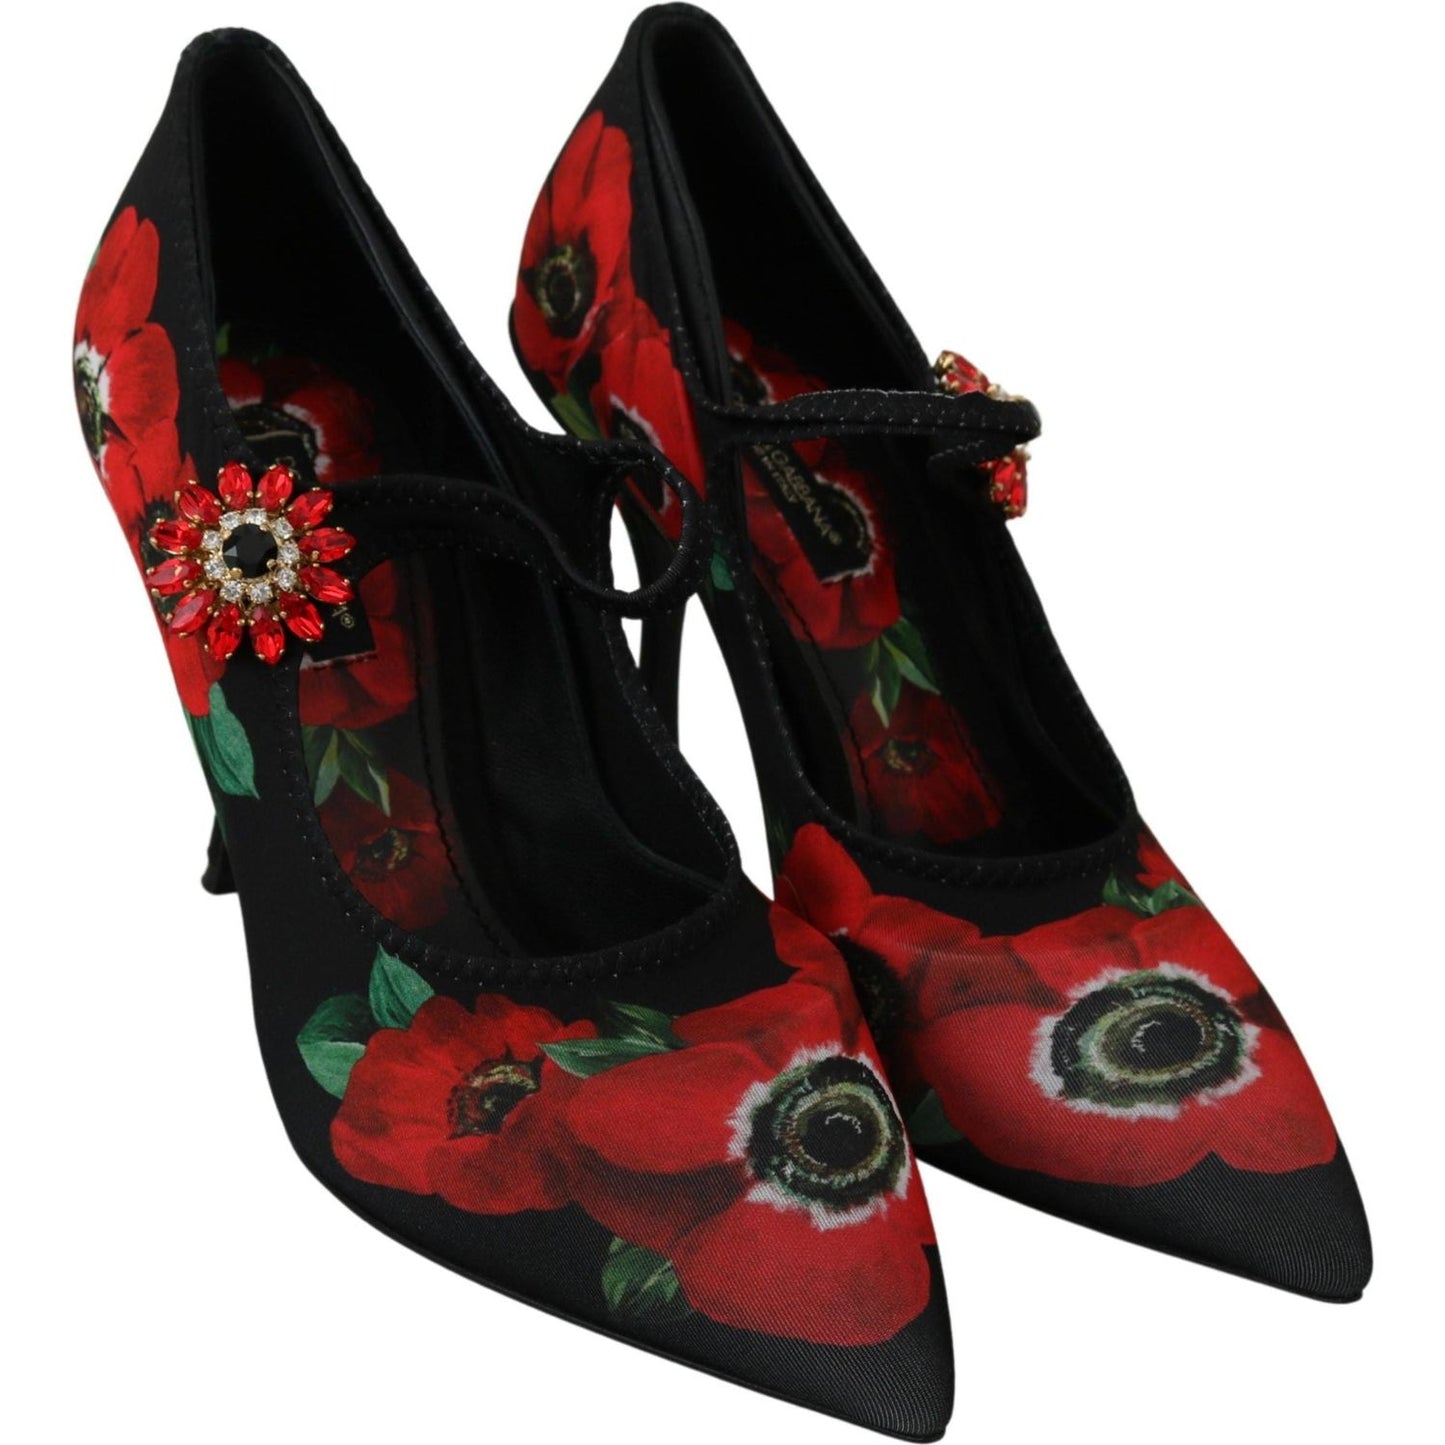 Dolce & Gabbana Floral Mary Janes Pumps with Crystal Detail black-red-floral-mary-janes-pumps-shoes Shoes IMG_0226-scaled-99d98057-336.jpg